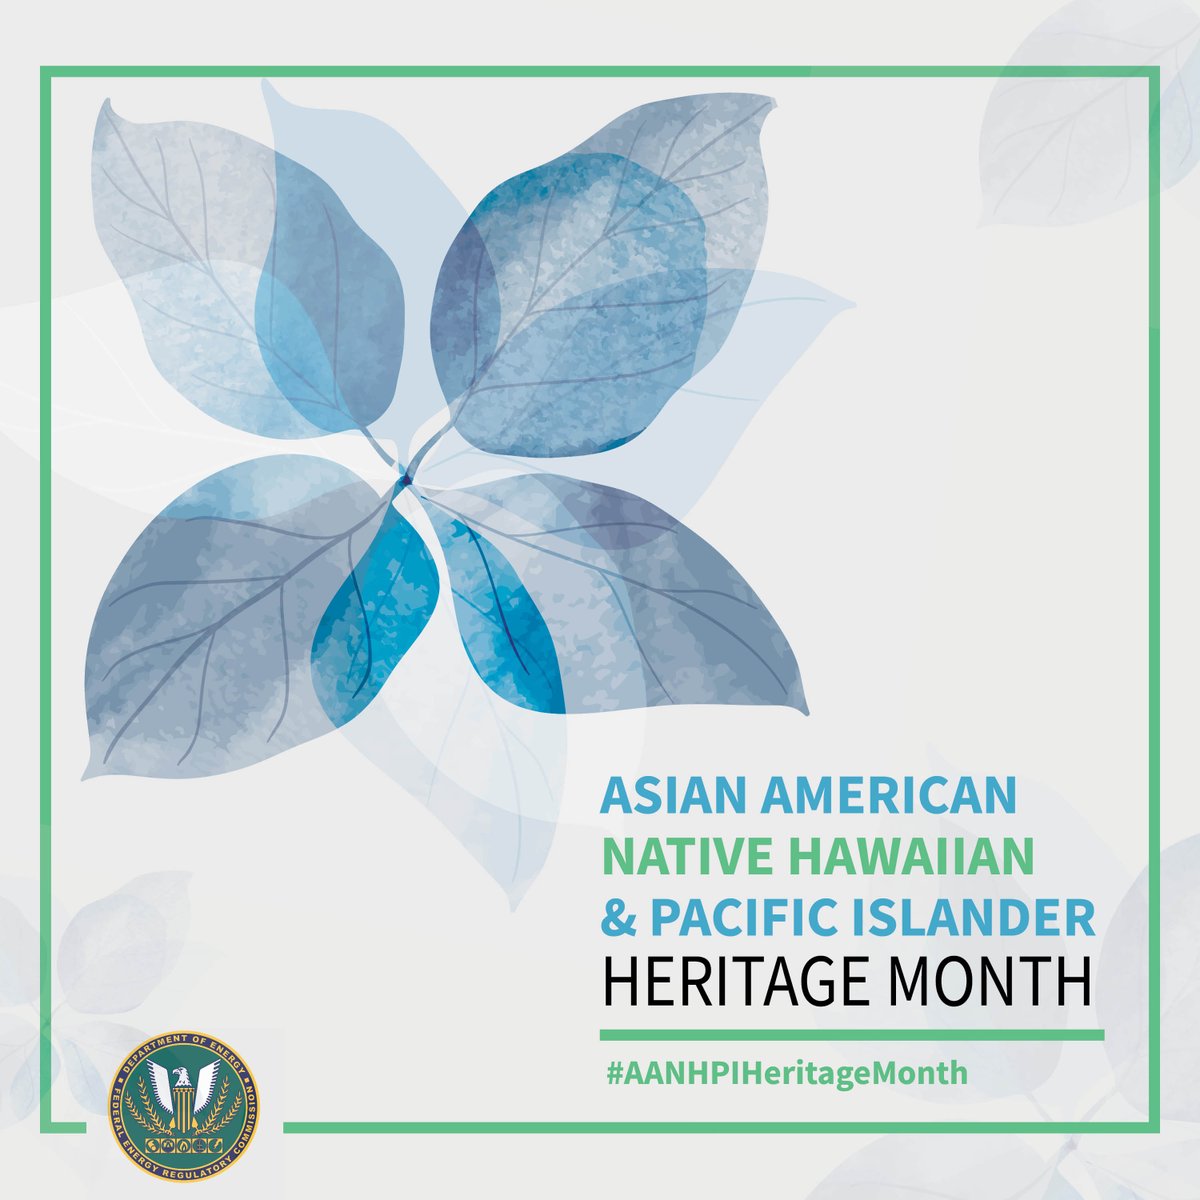 @FERC celebrates #AANHPIHeritageMonth and the many contributions our colleagues have made to America’s history and future success.